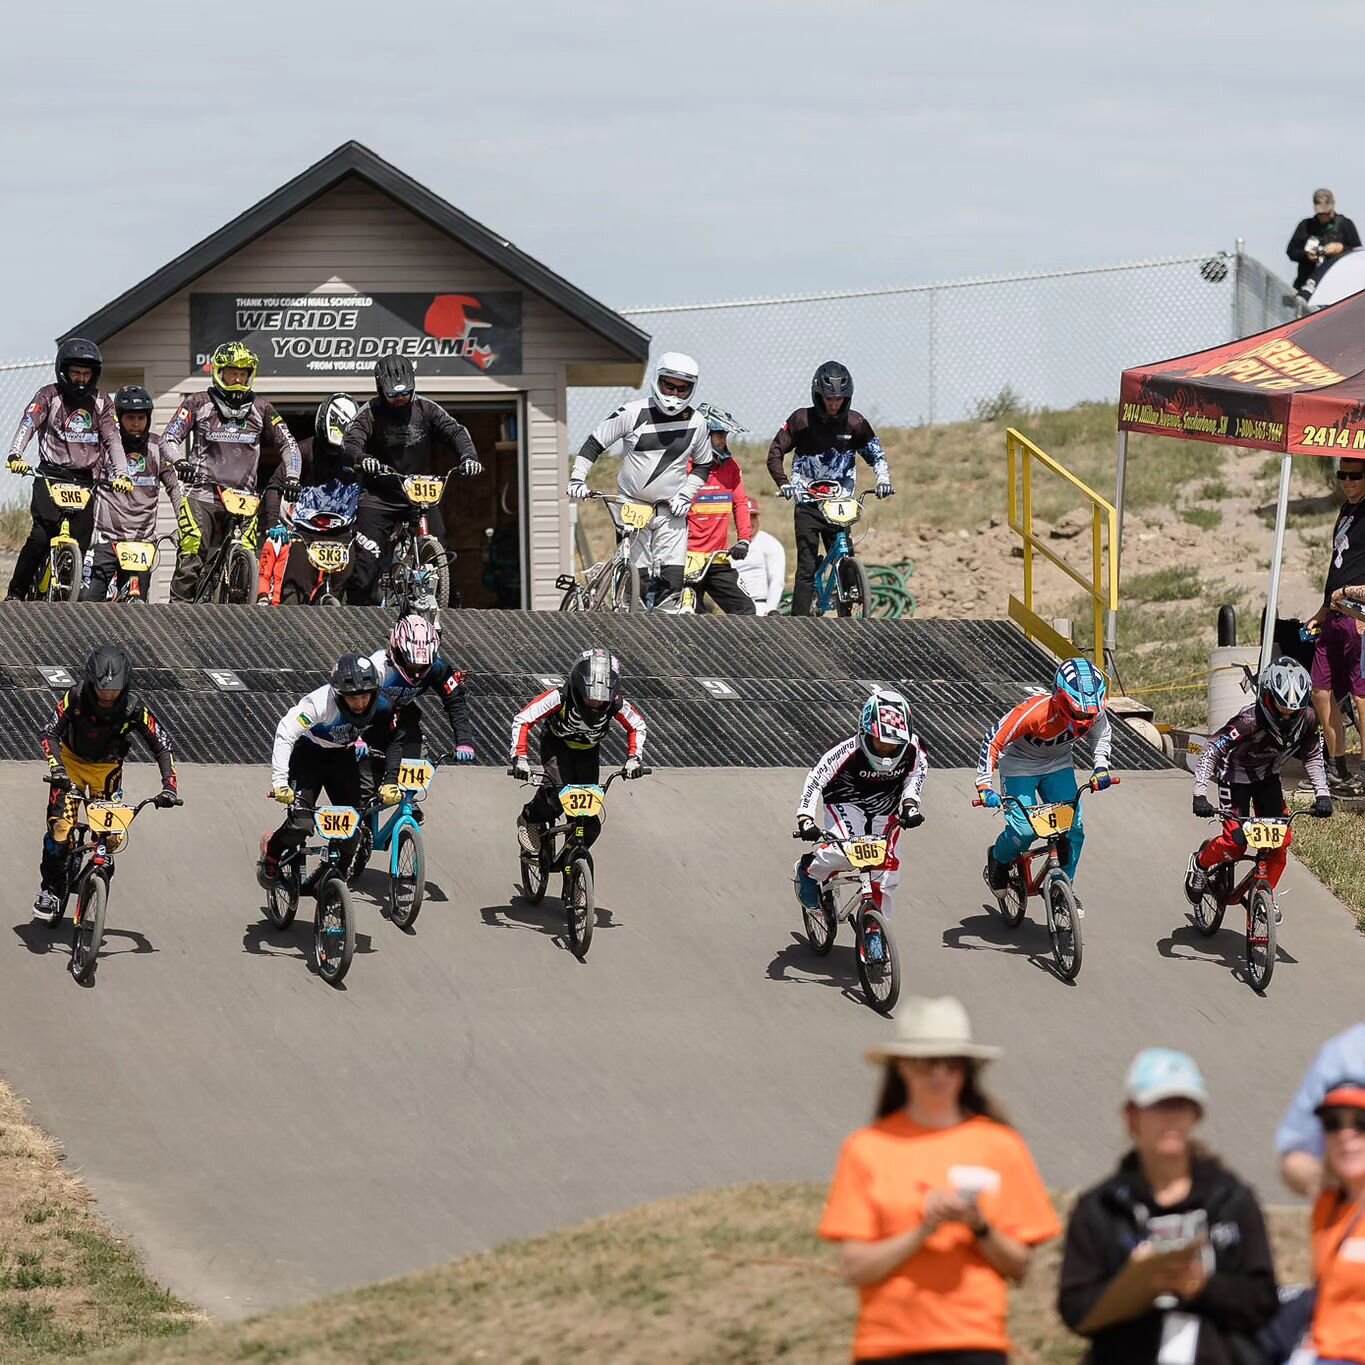 District Racing is back at Diamond BMX for the rest of the season starting next Tuesday August 29th. This weekend was alot of fun having riders from other communities at the track and we want to keep the momentum going 🏁

Emails will be sent out wit